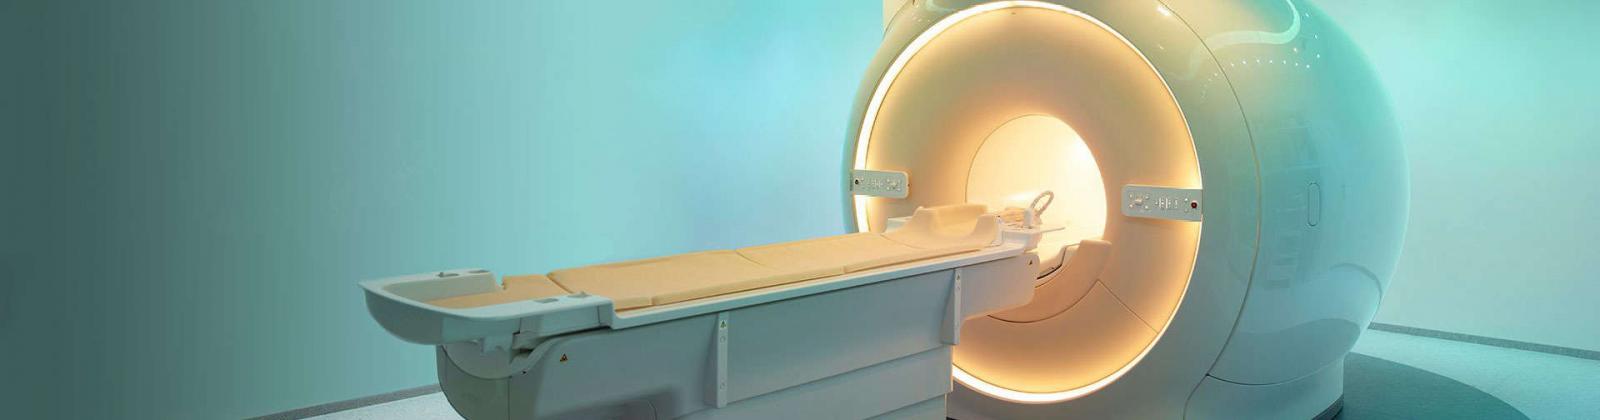 Customized integral service for research projects with cerebral magnetic resonance imaging